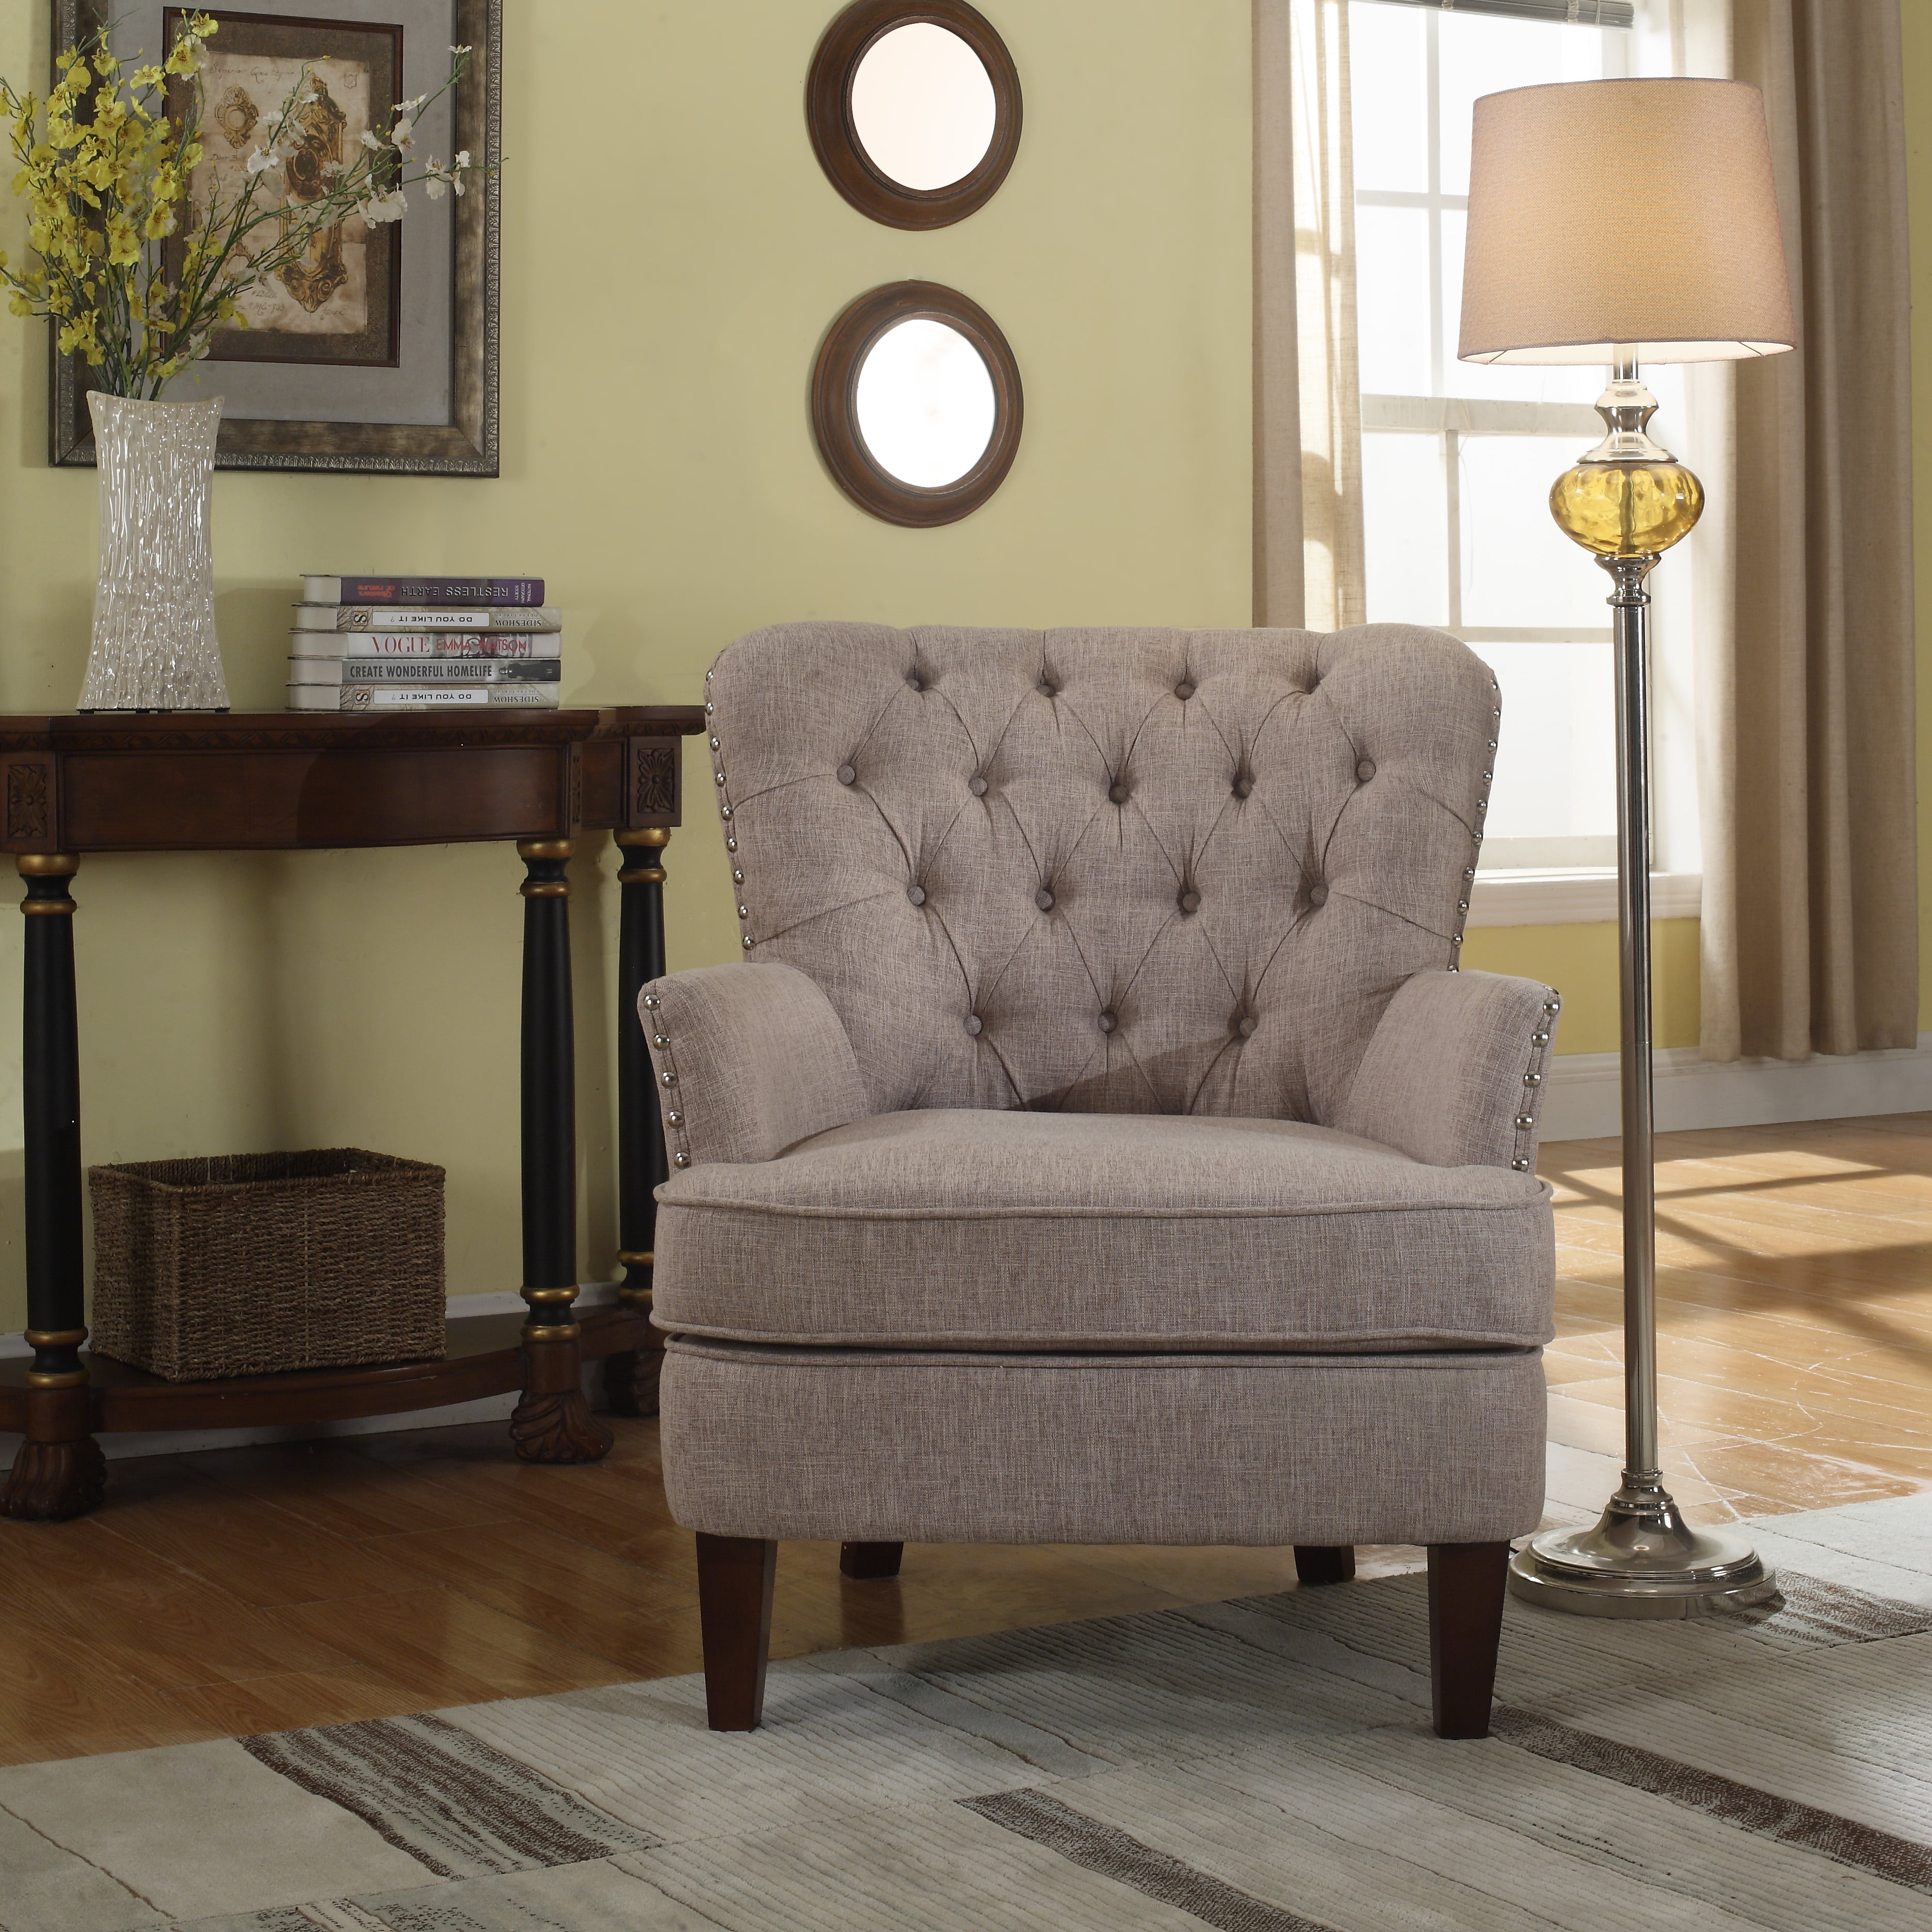 Button Tufted Accent Chair with Nailhead, Taupe Color - Walmart.com